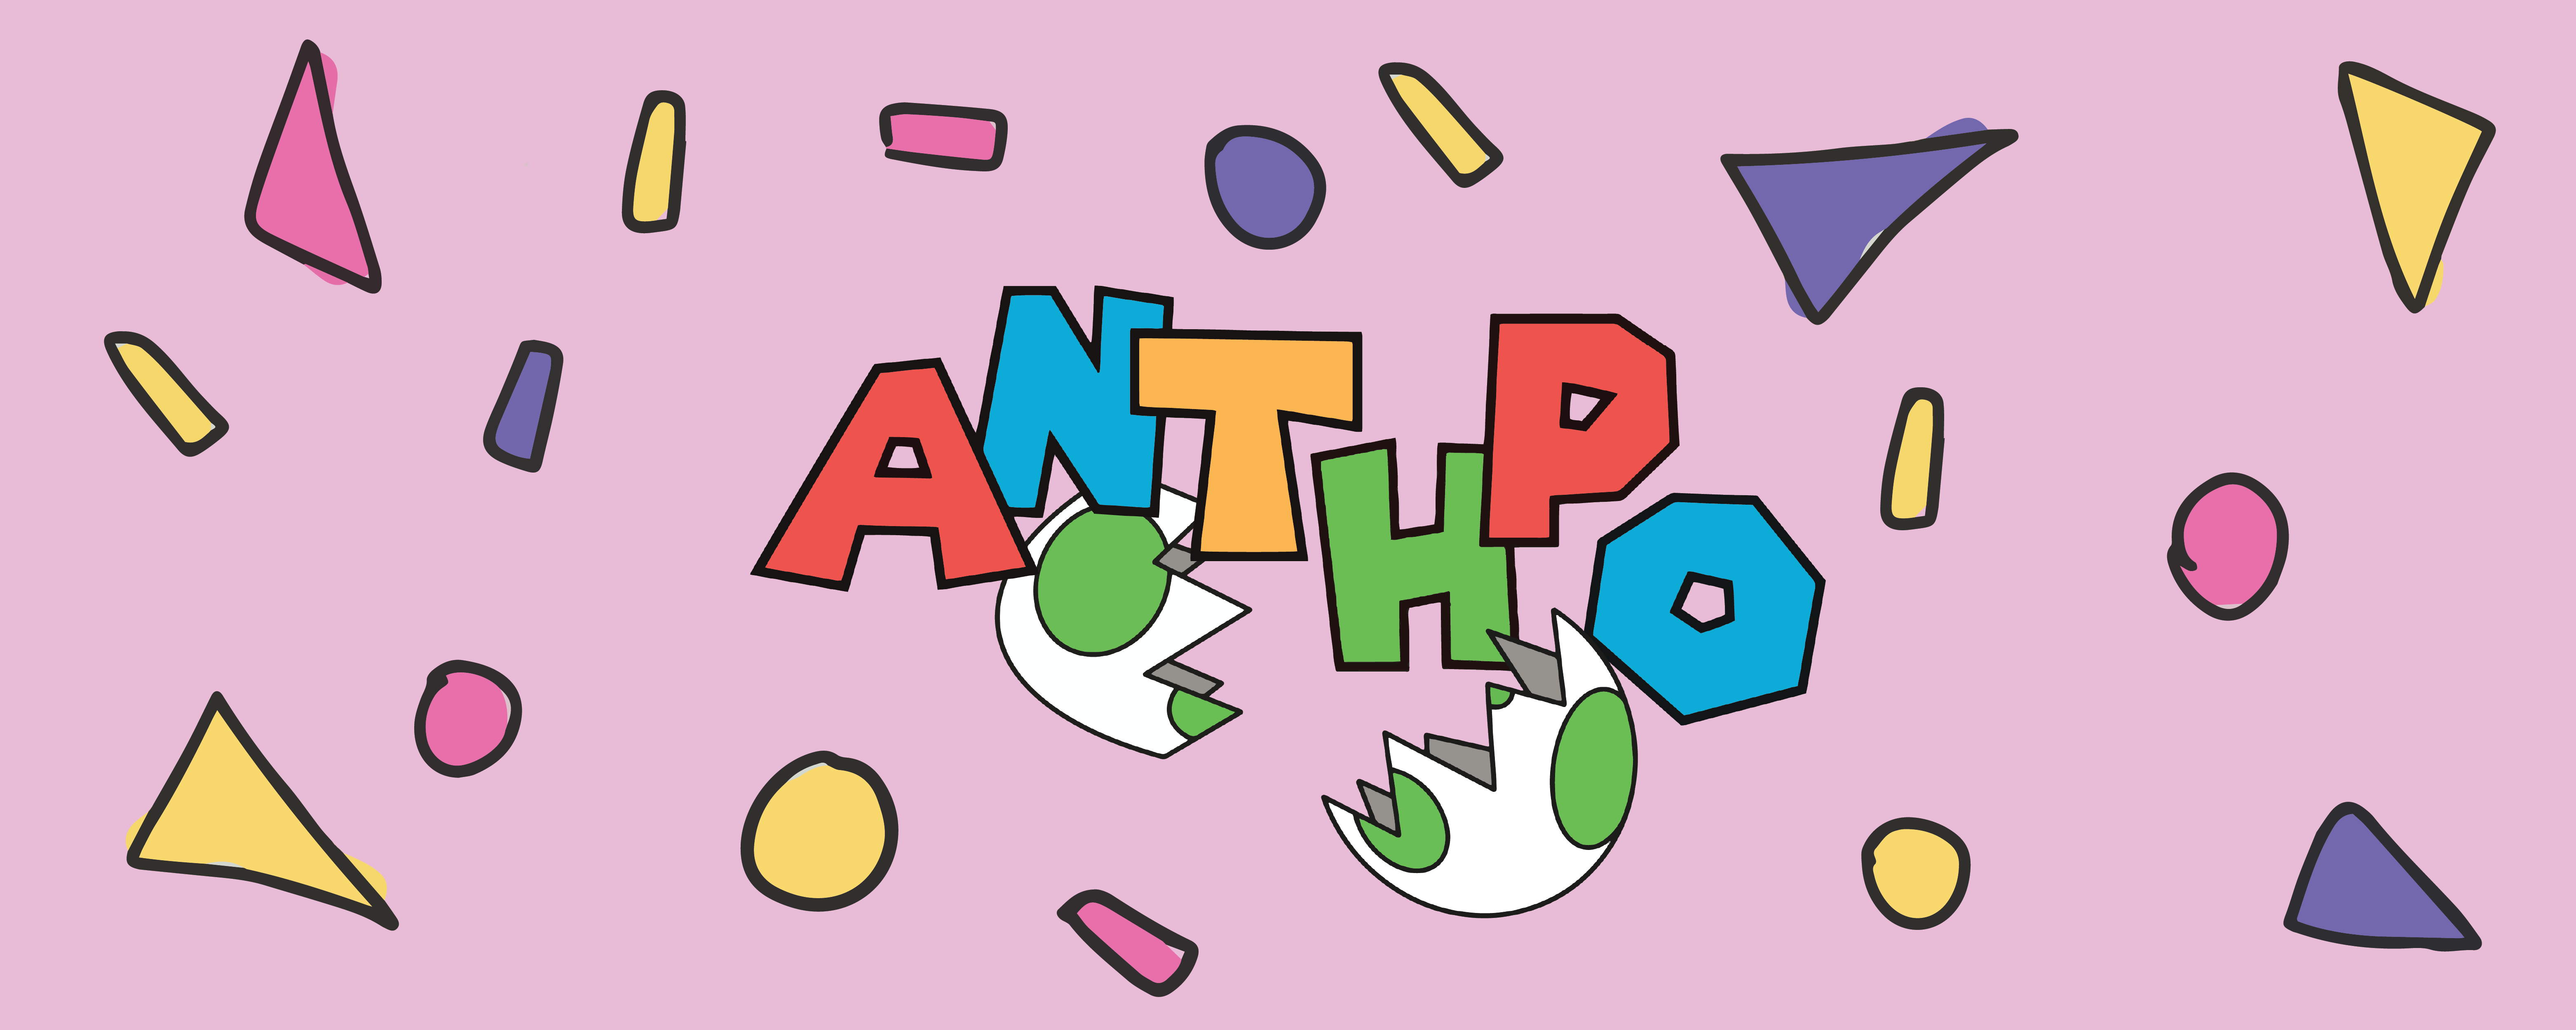 Anthpo Official Merch on Crowdmade